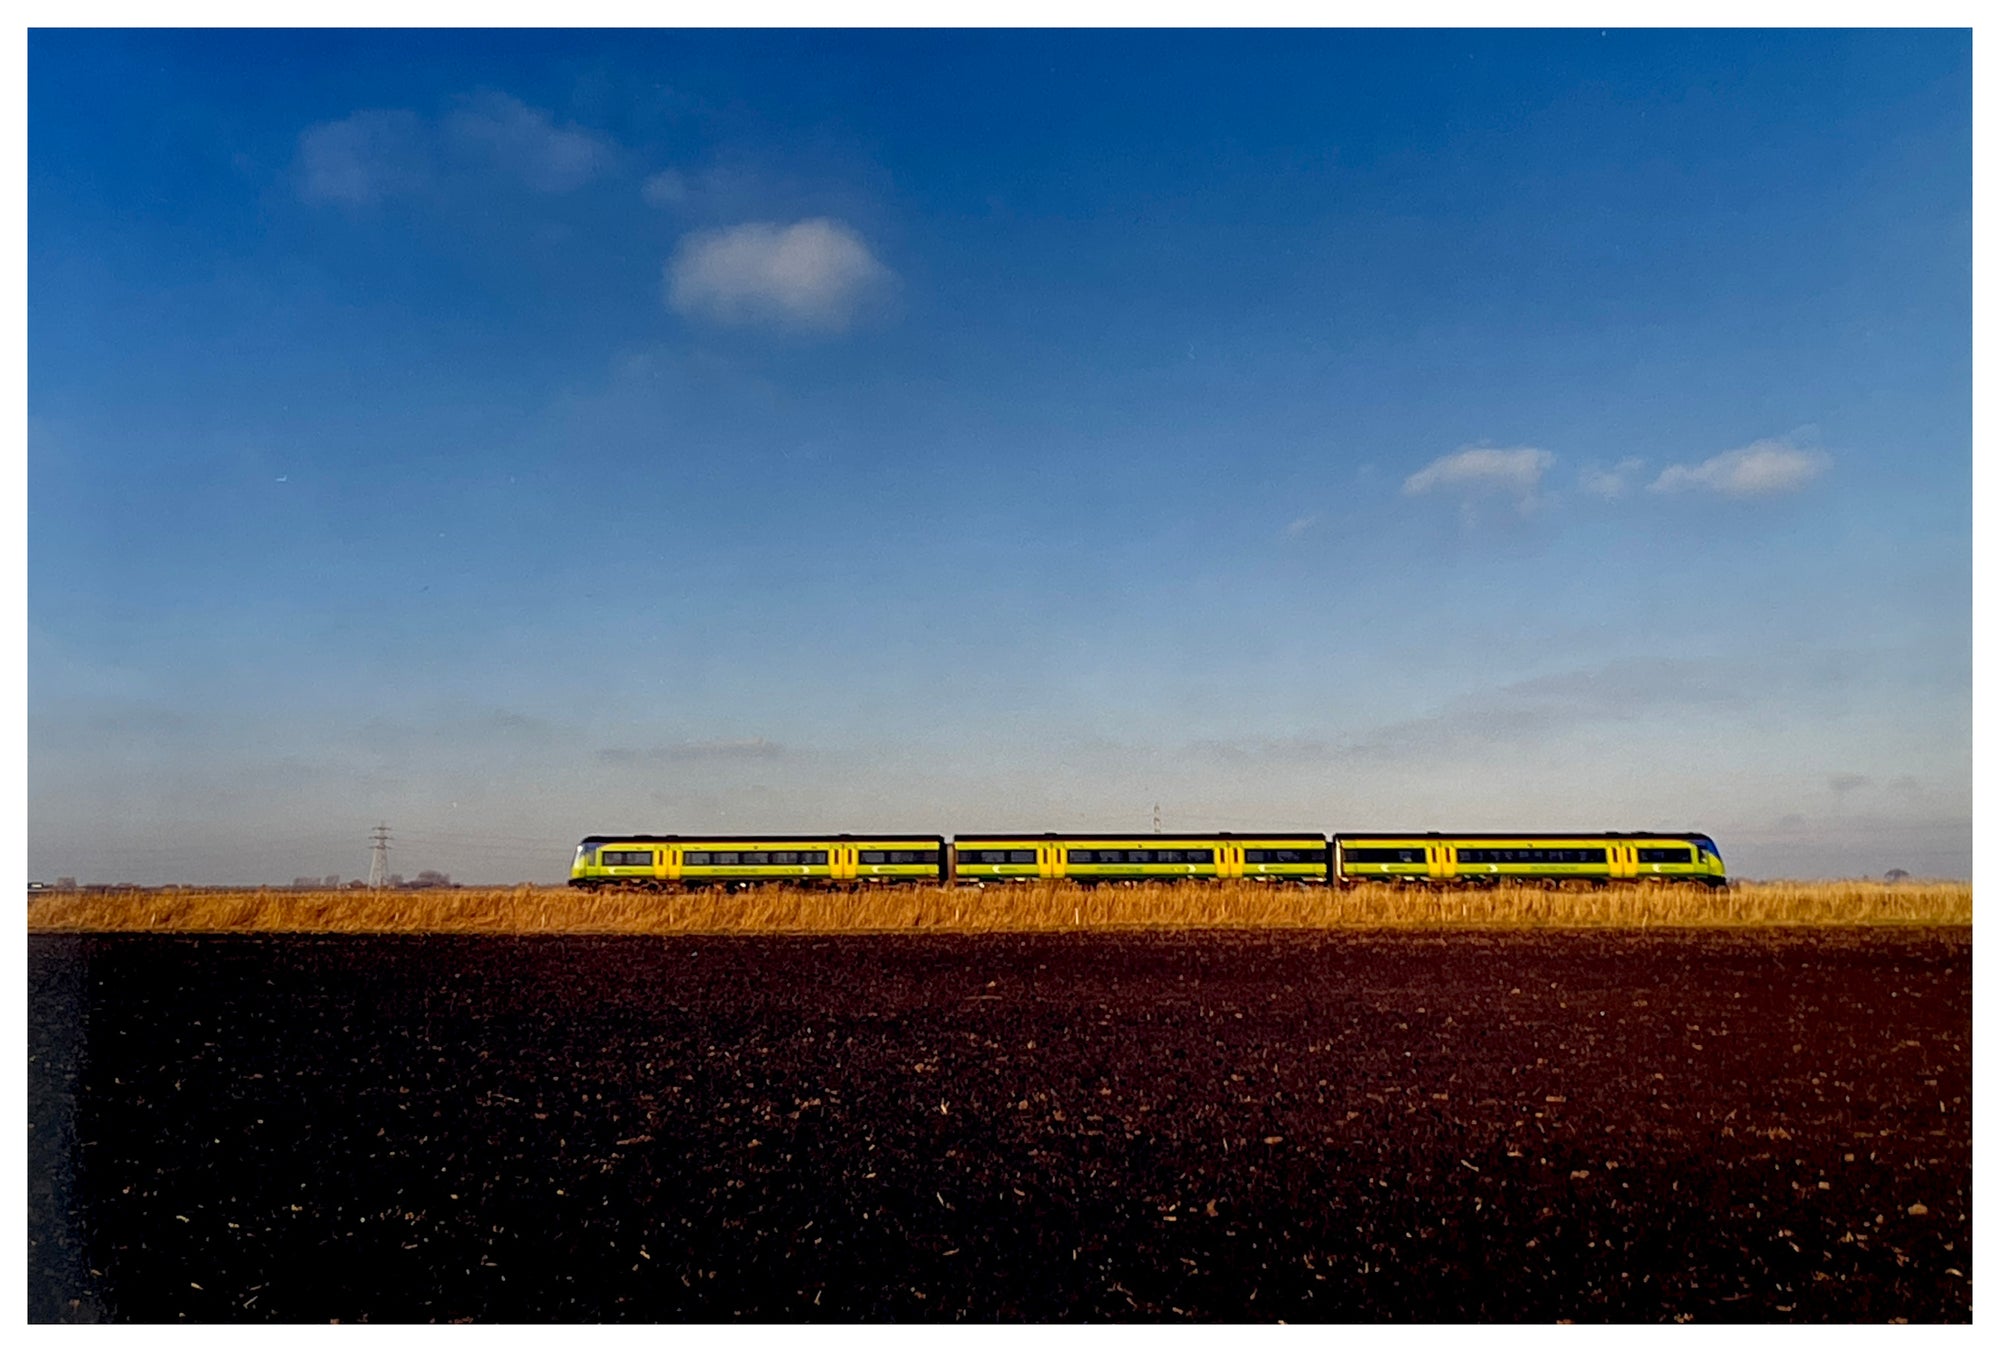 Photograph by Richard Heeps. This photograph has a yellow train travelling behind a fen embankment. A blue sky sits behind.